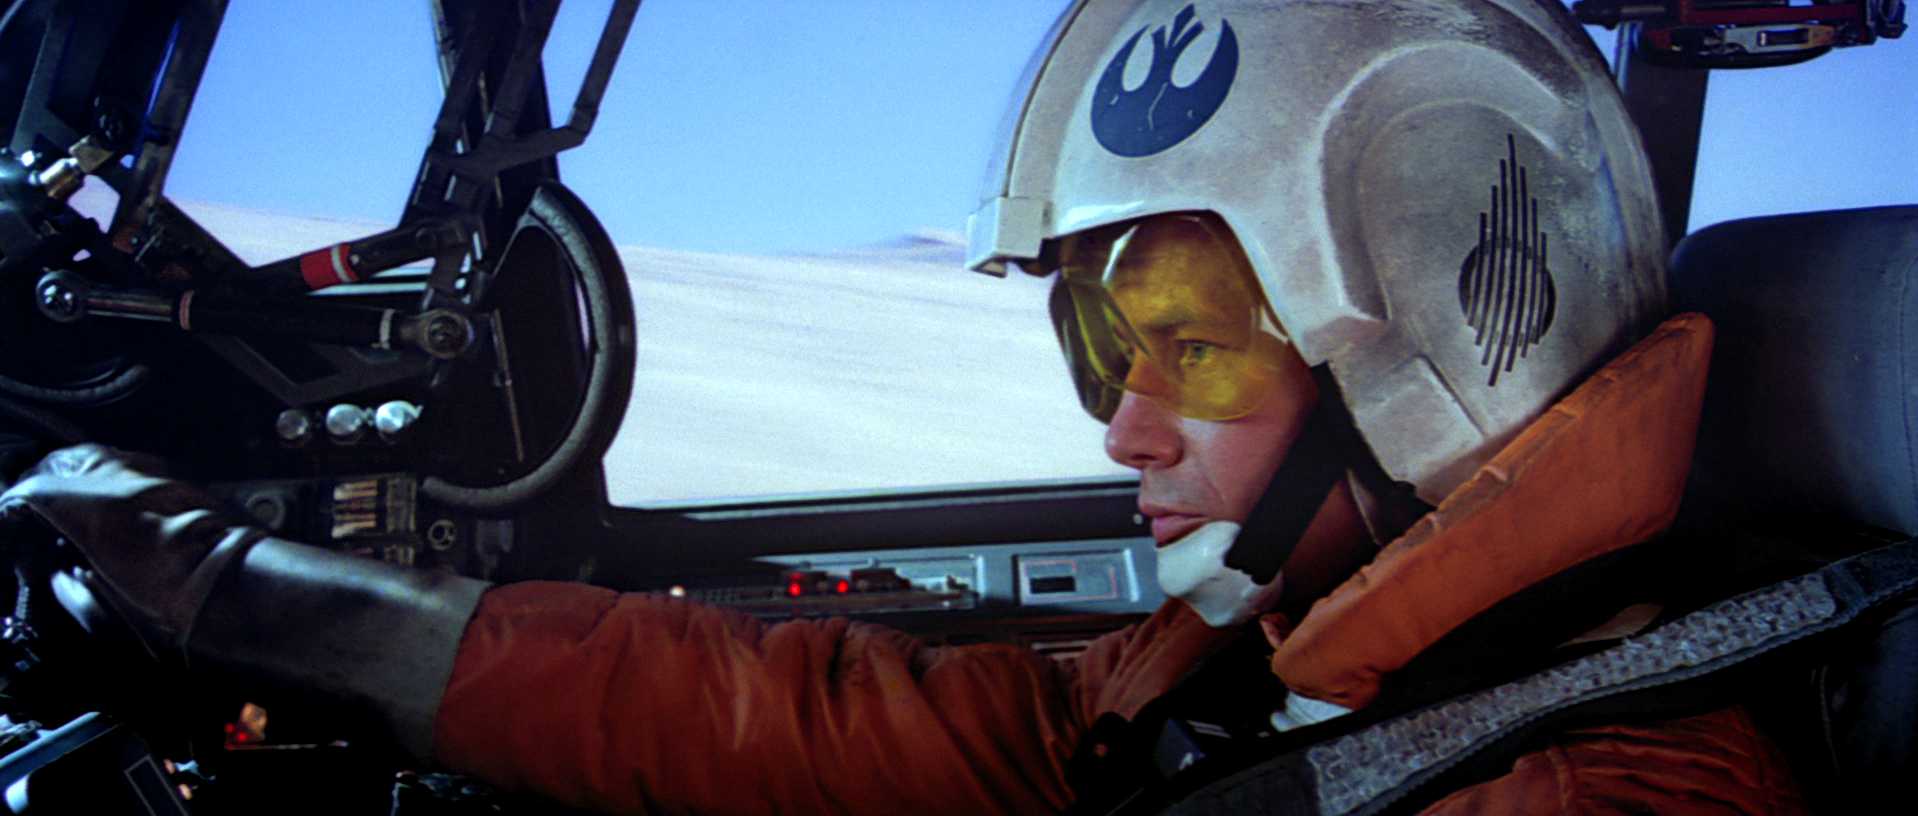 What is Luke Skywalker's Co-Pilot's name that tragically dies in the Battle of Hoth